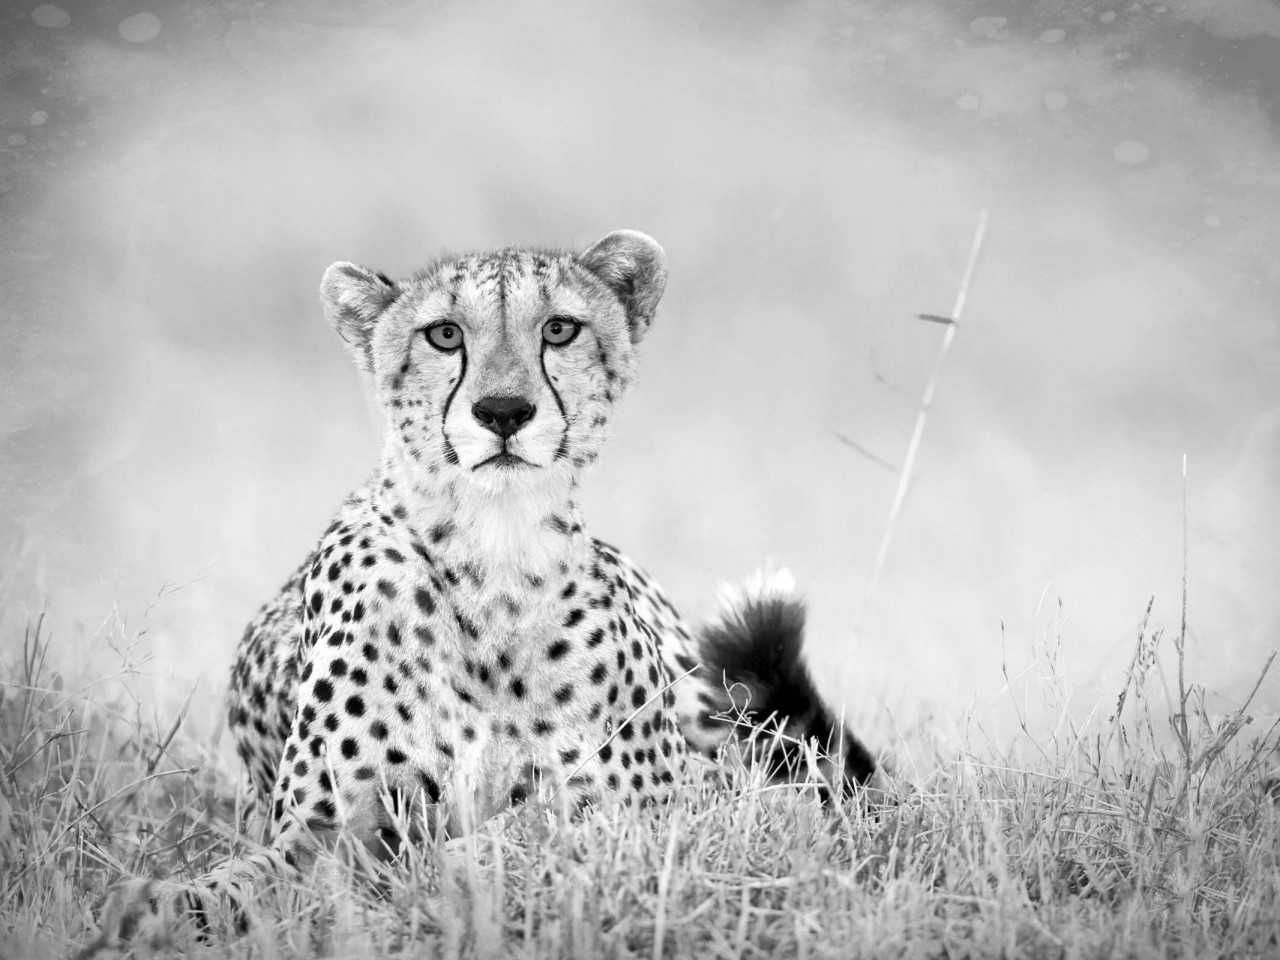 Cheetah Backgrounds wallpaper Black and White Cheetah Backgrounds